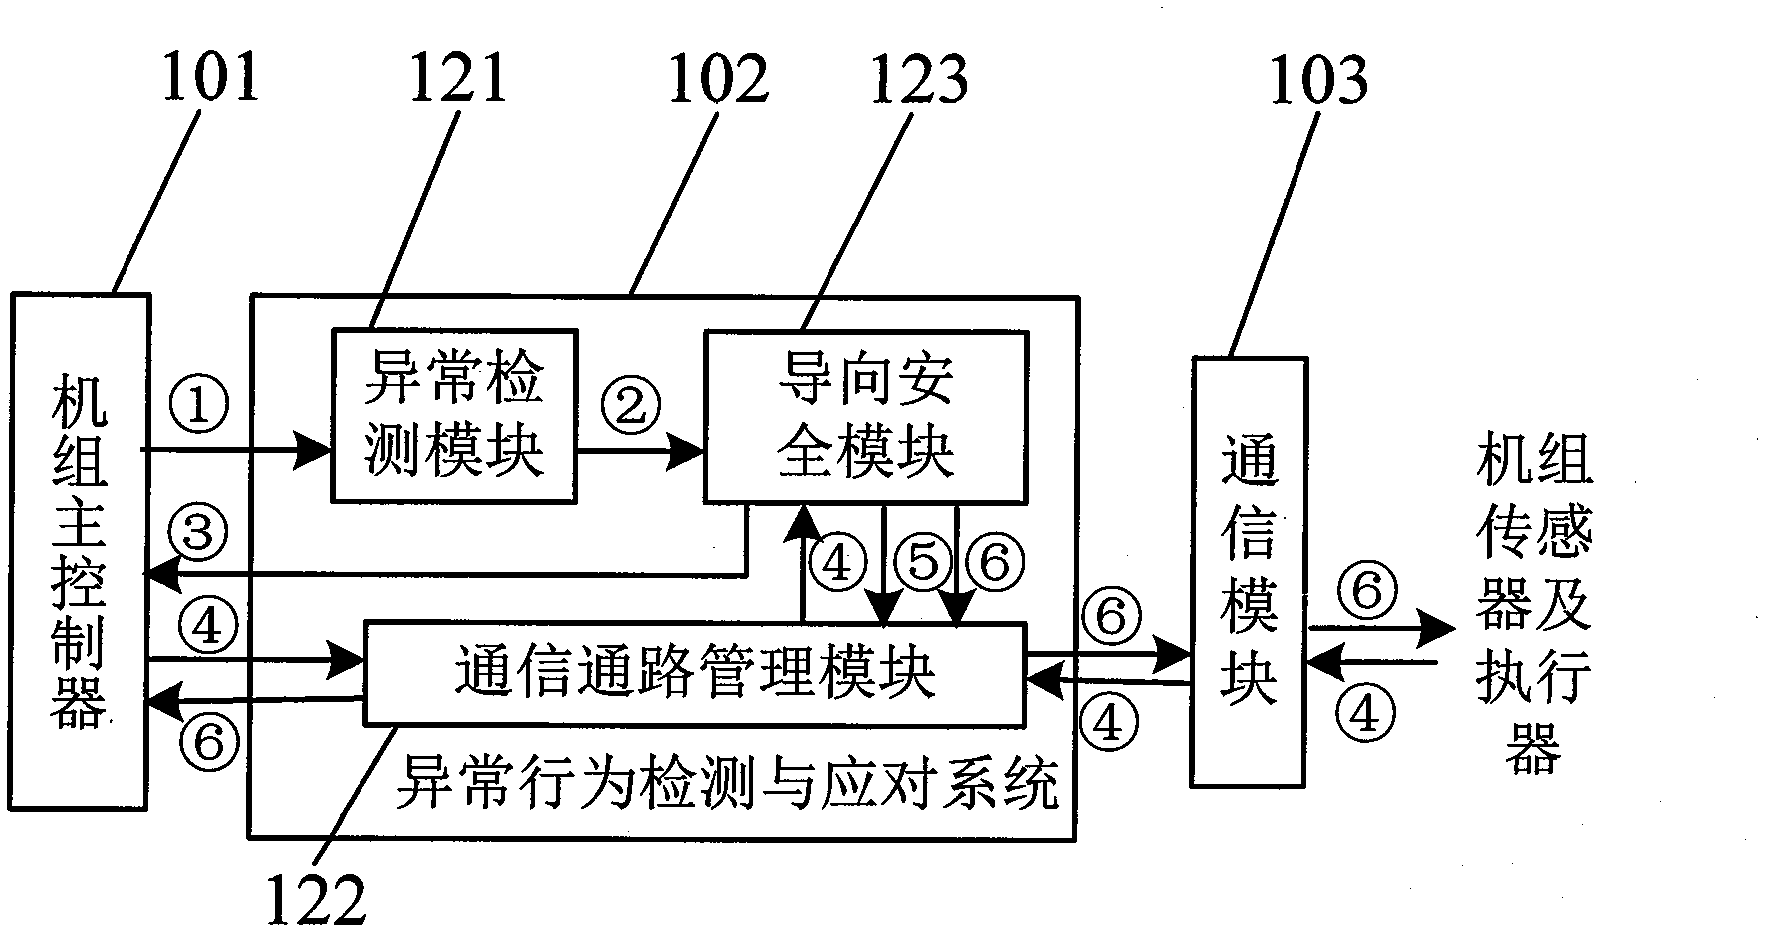 Abnormal behavior detection and guide safety method for control software of wind generation set